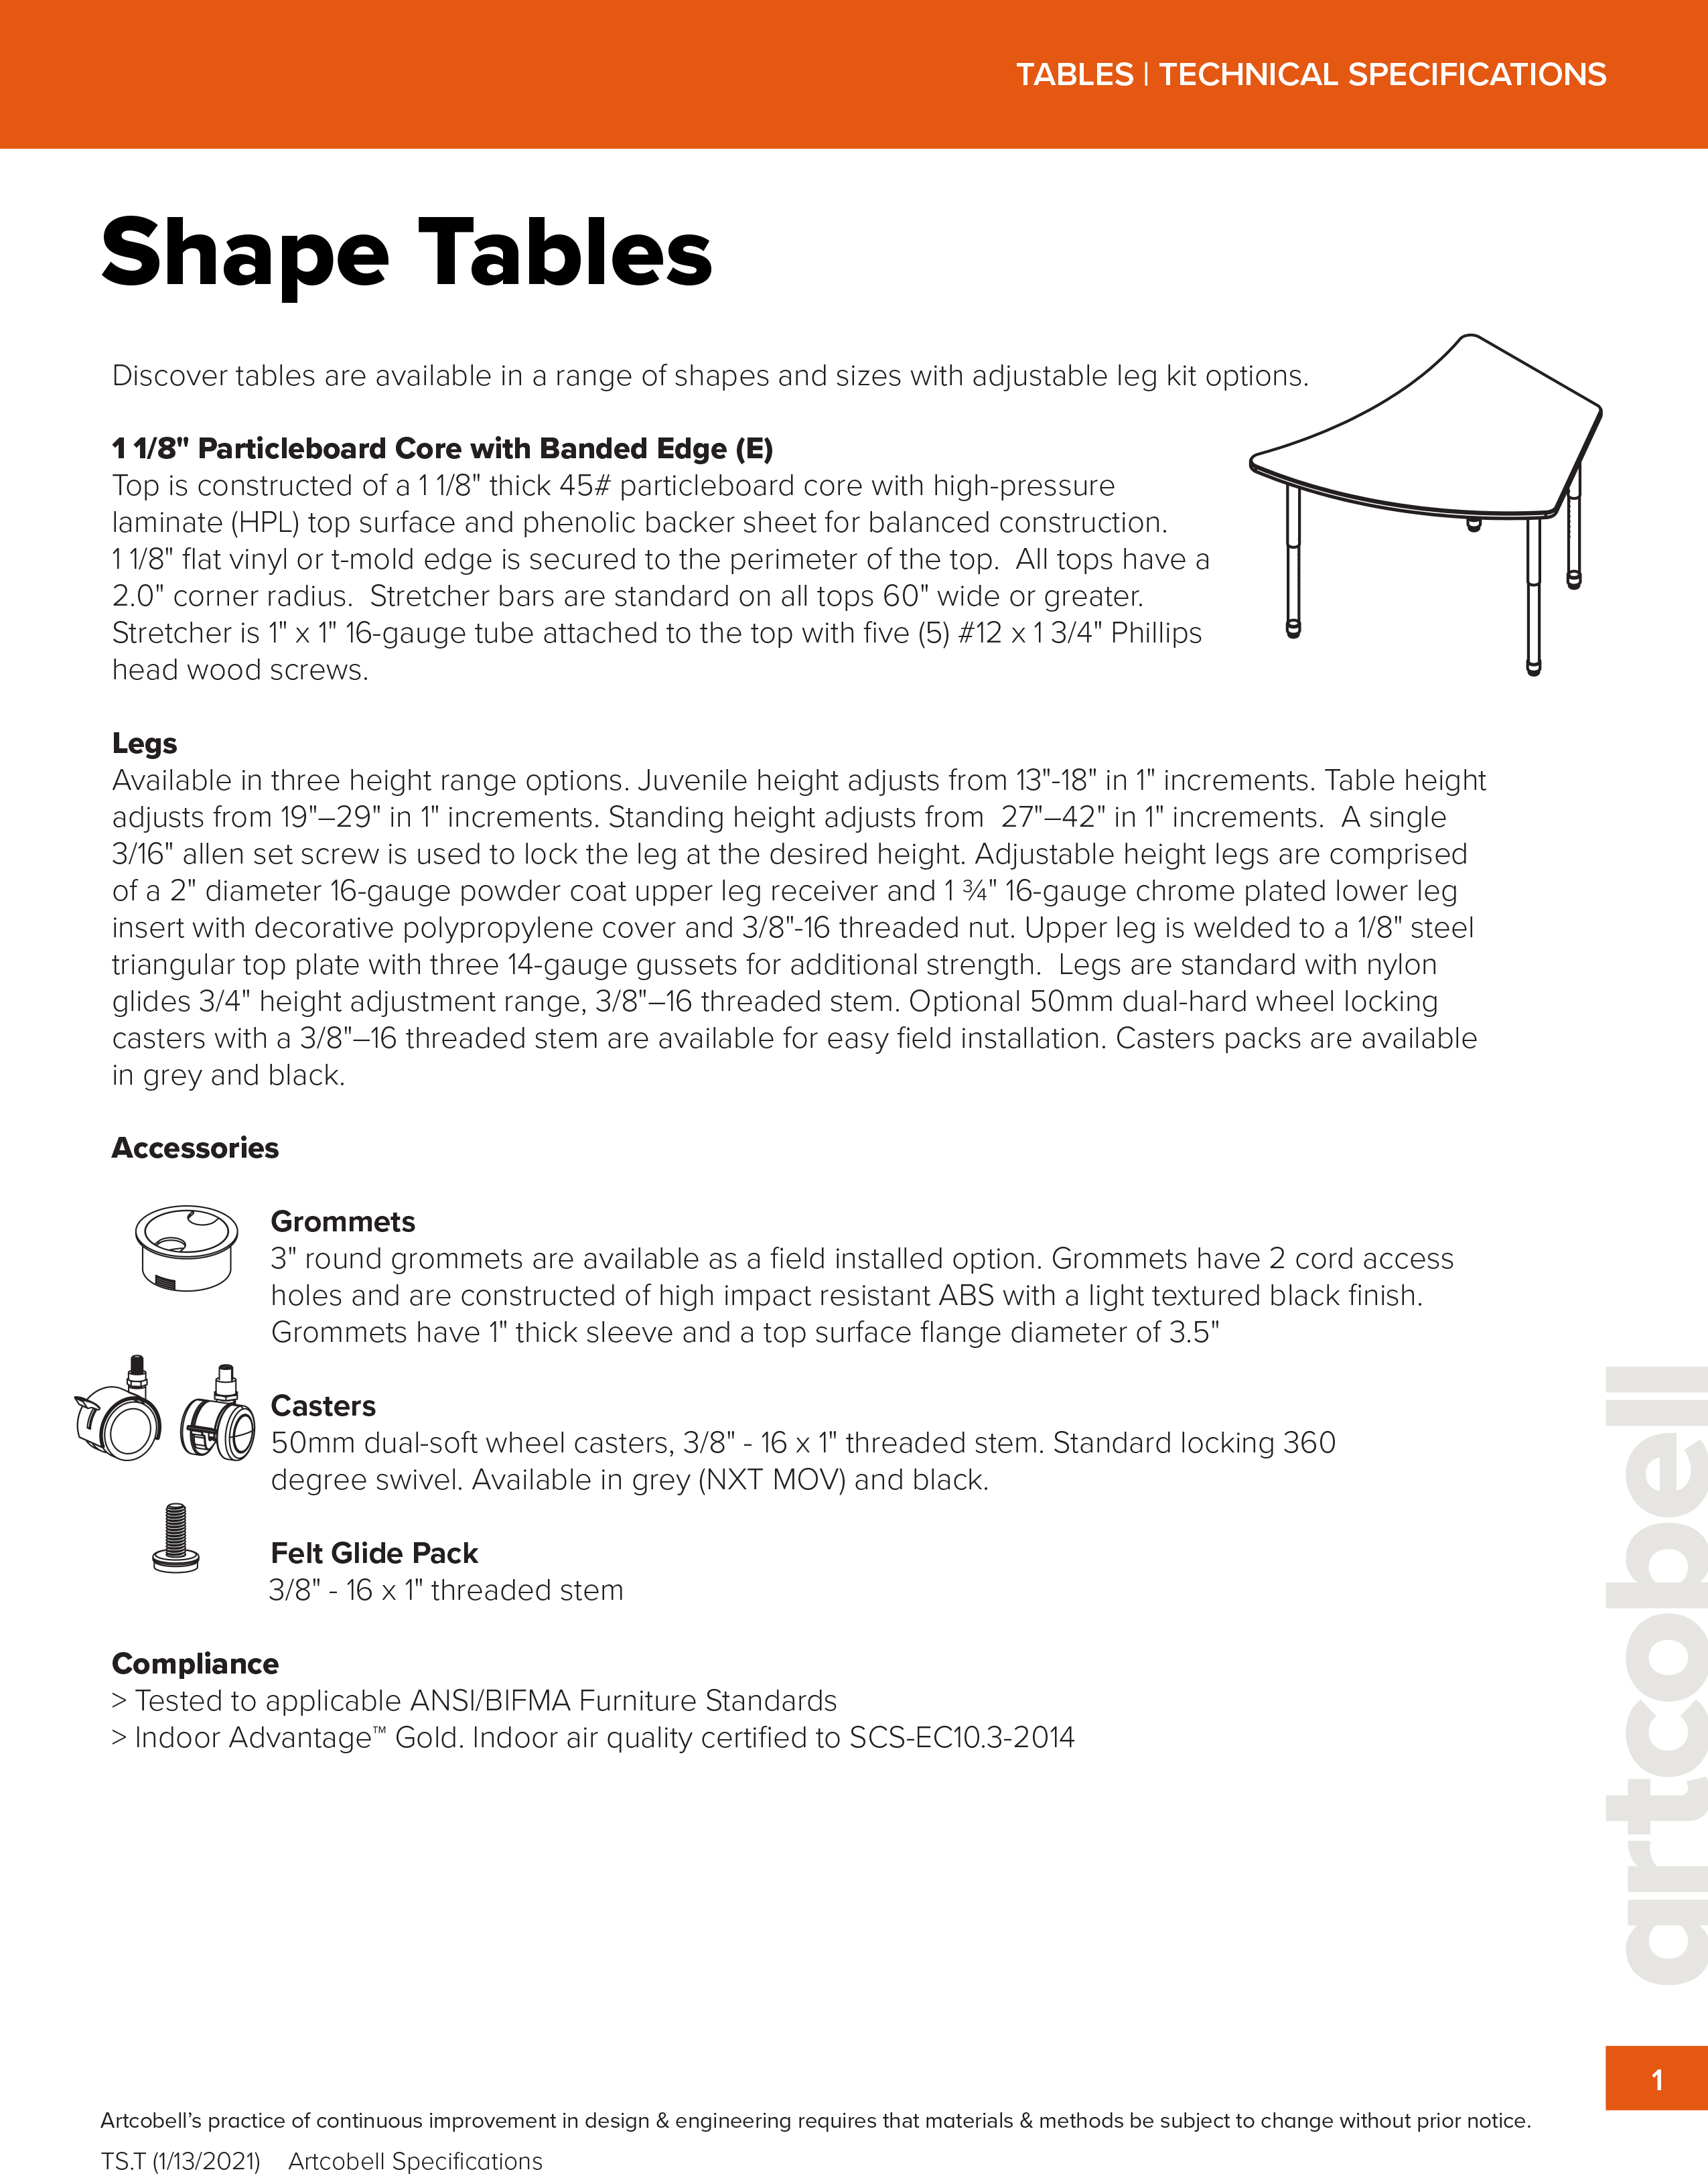 TableSpecifications_Shape_Tables